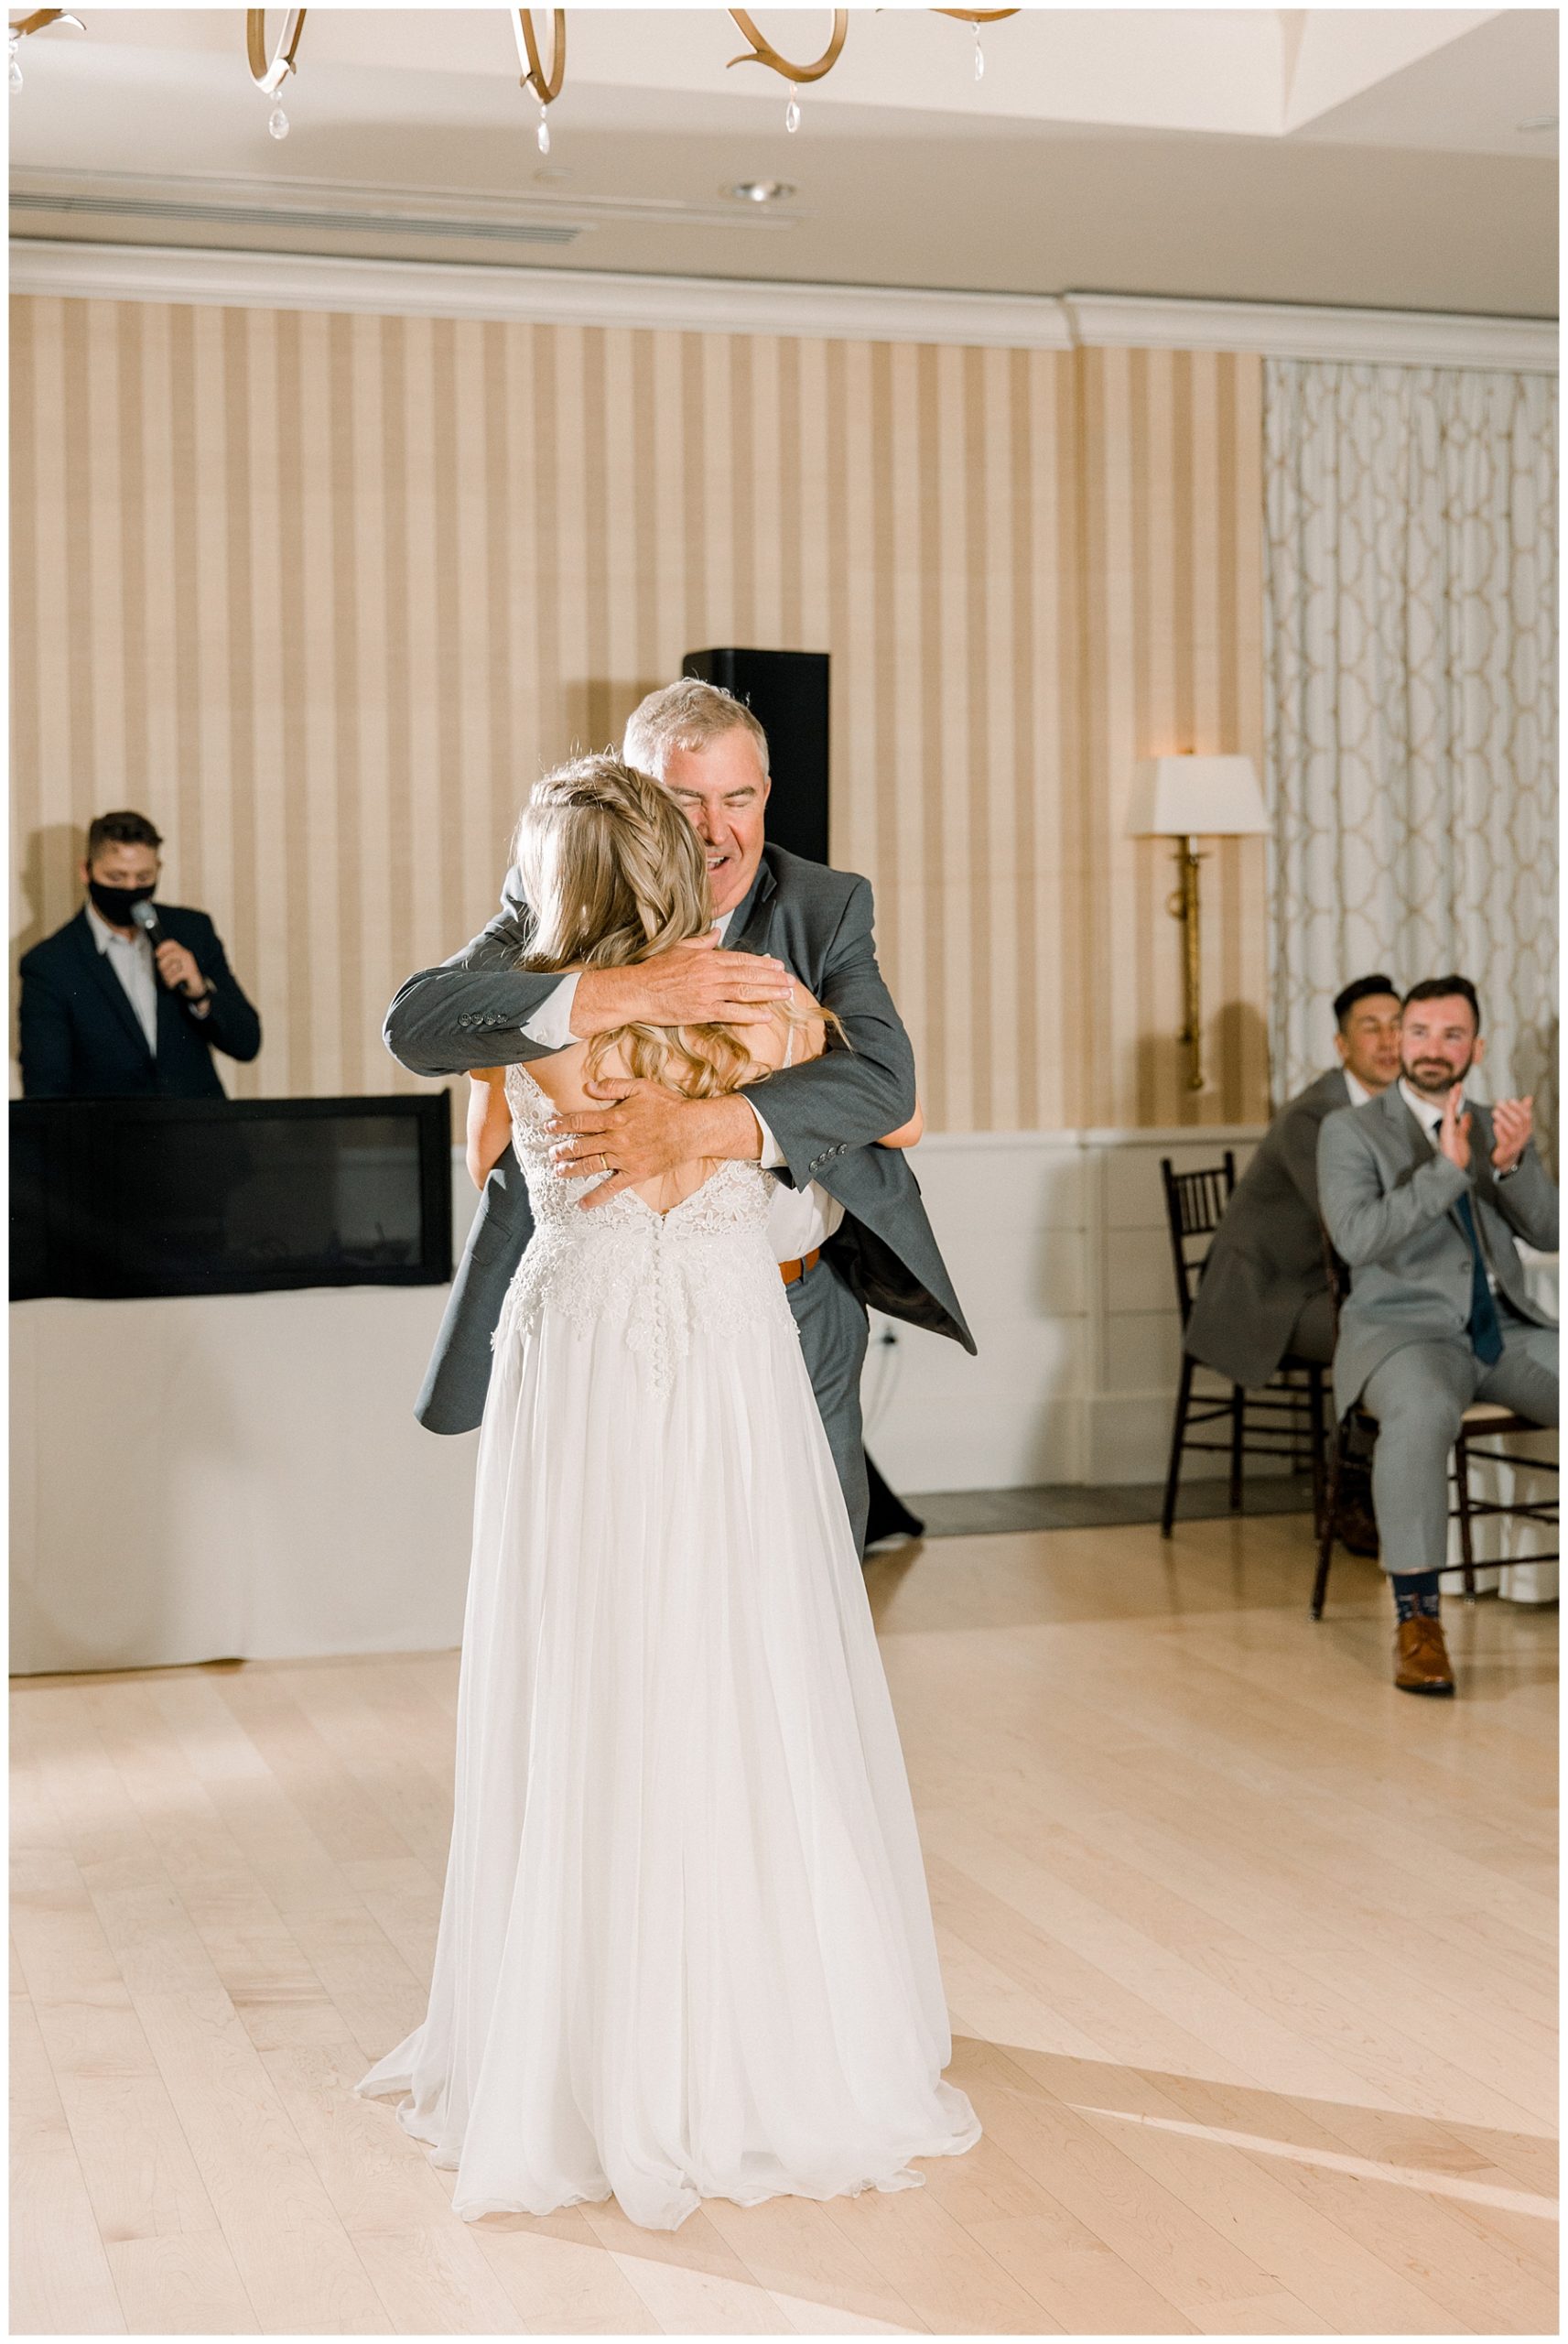 father-daughter dance captured by Chelsea Morton Photography